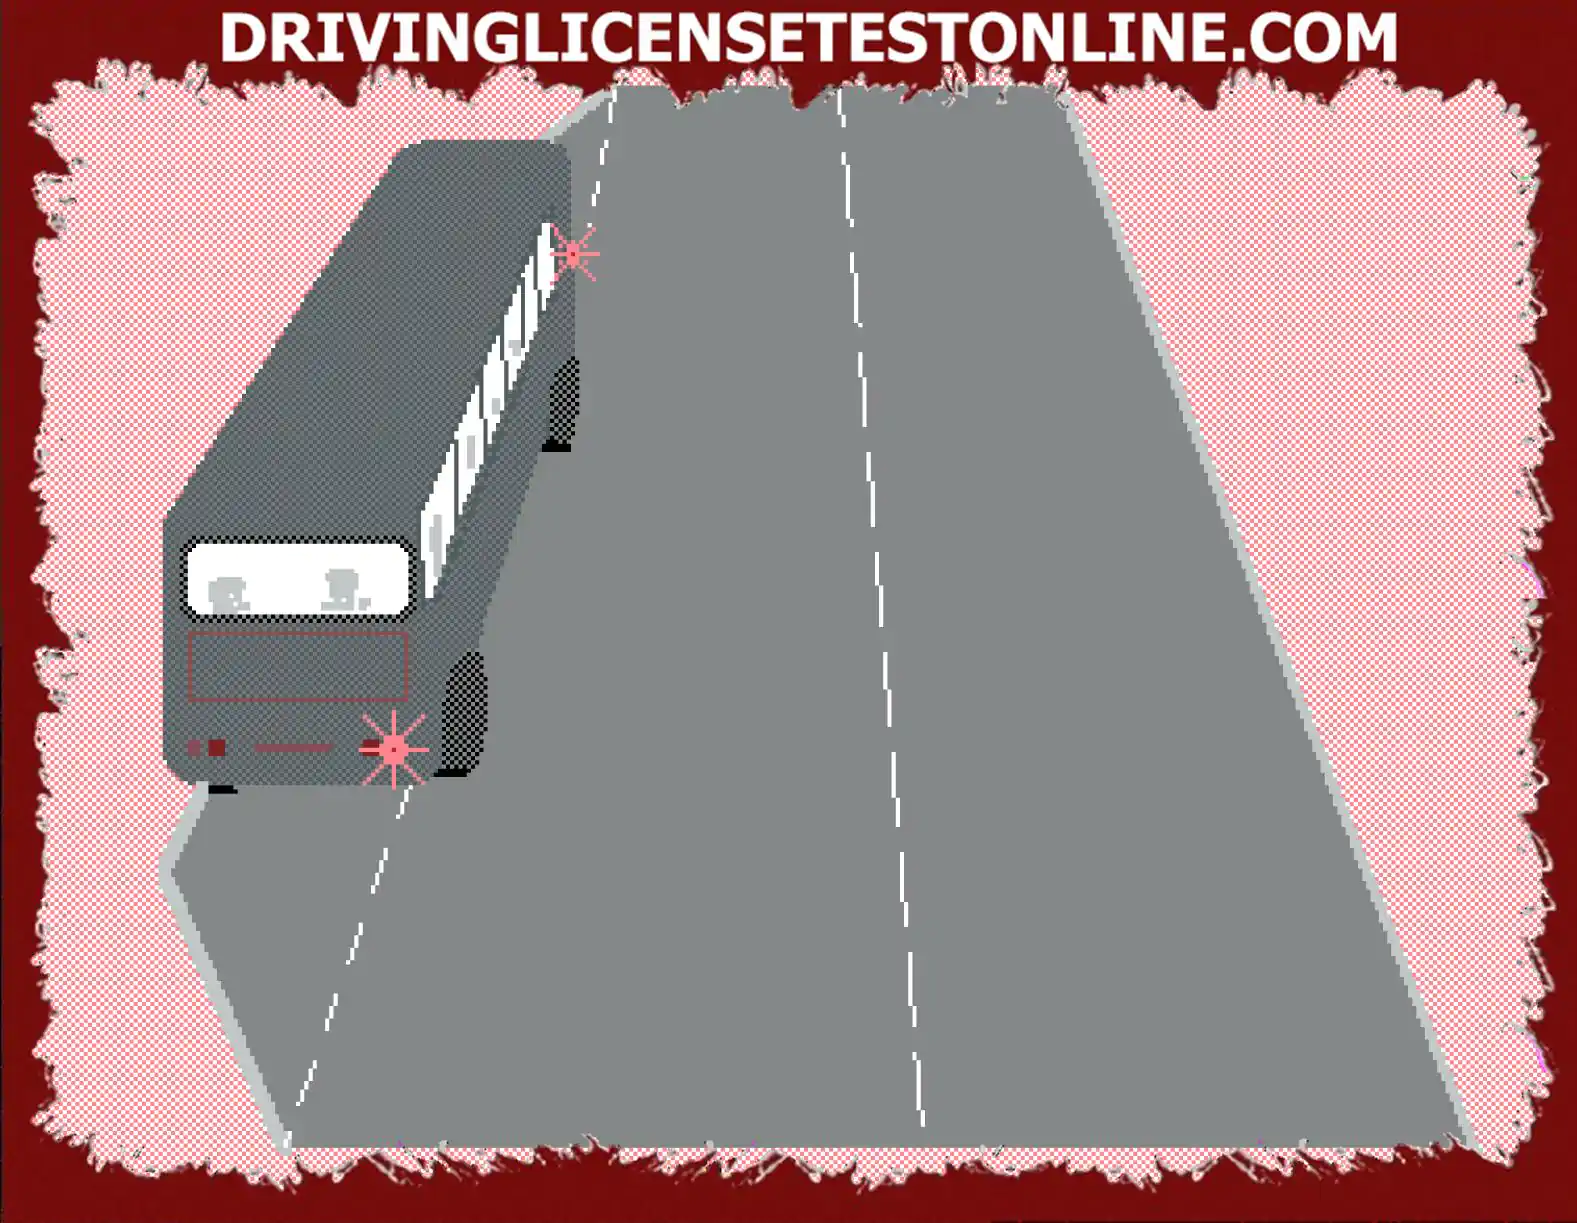 What should you do when you approach a bus indicating to turn away from the bus stop ?